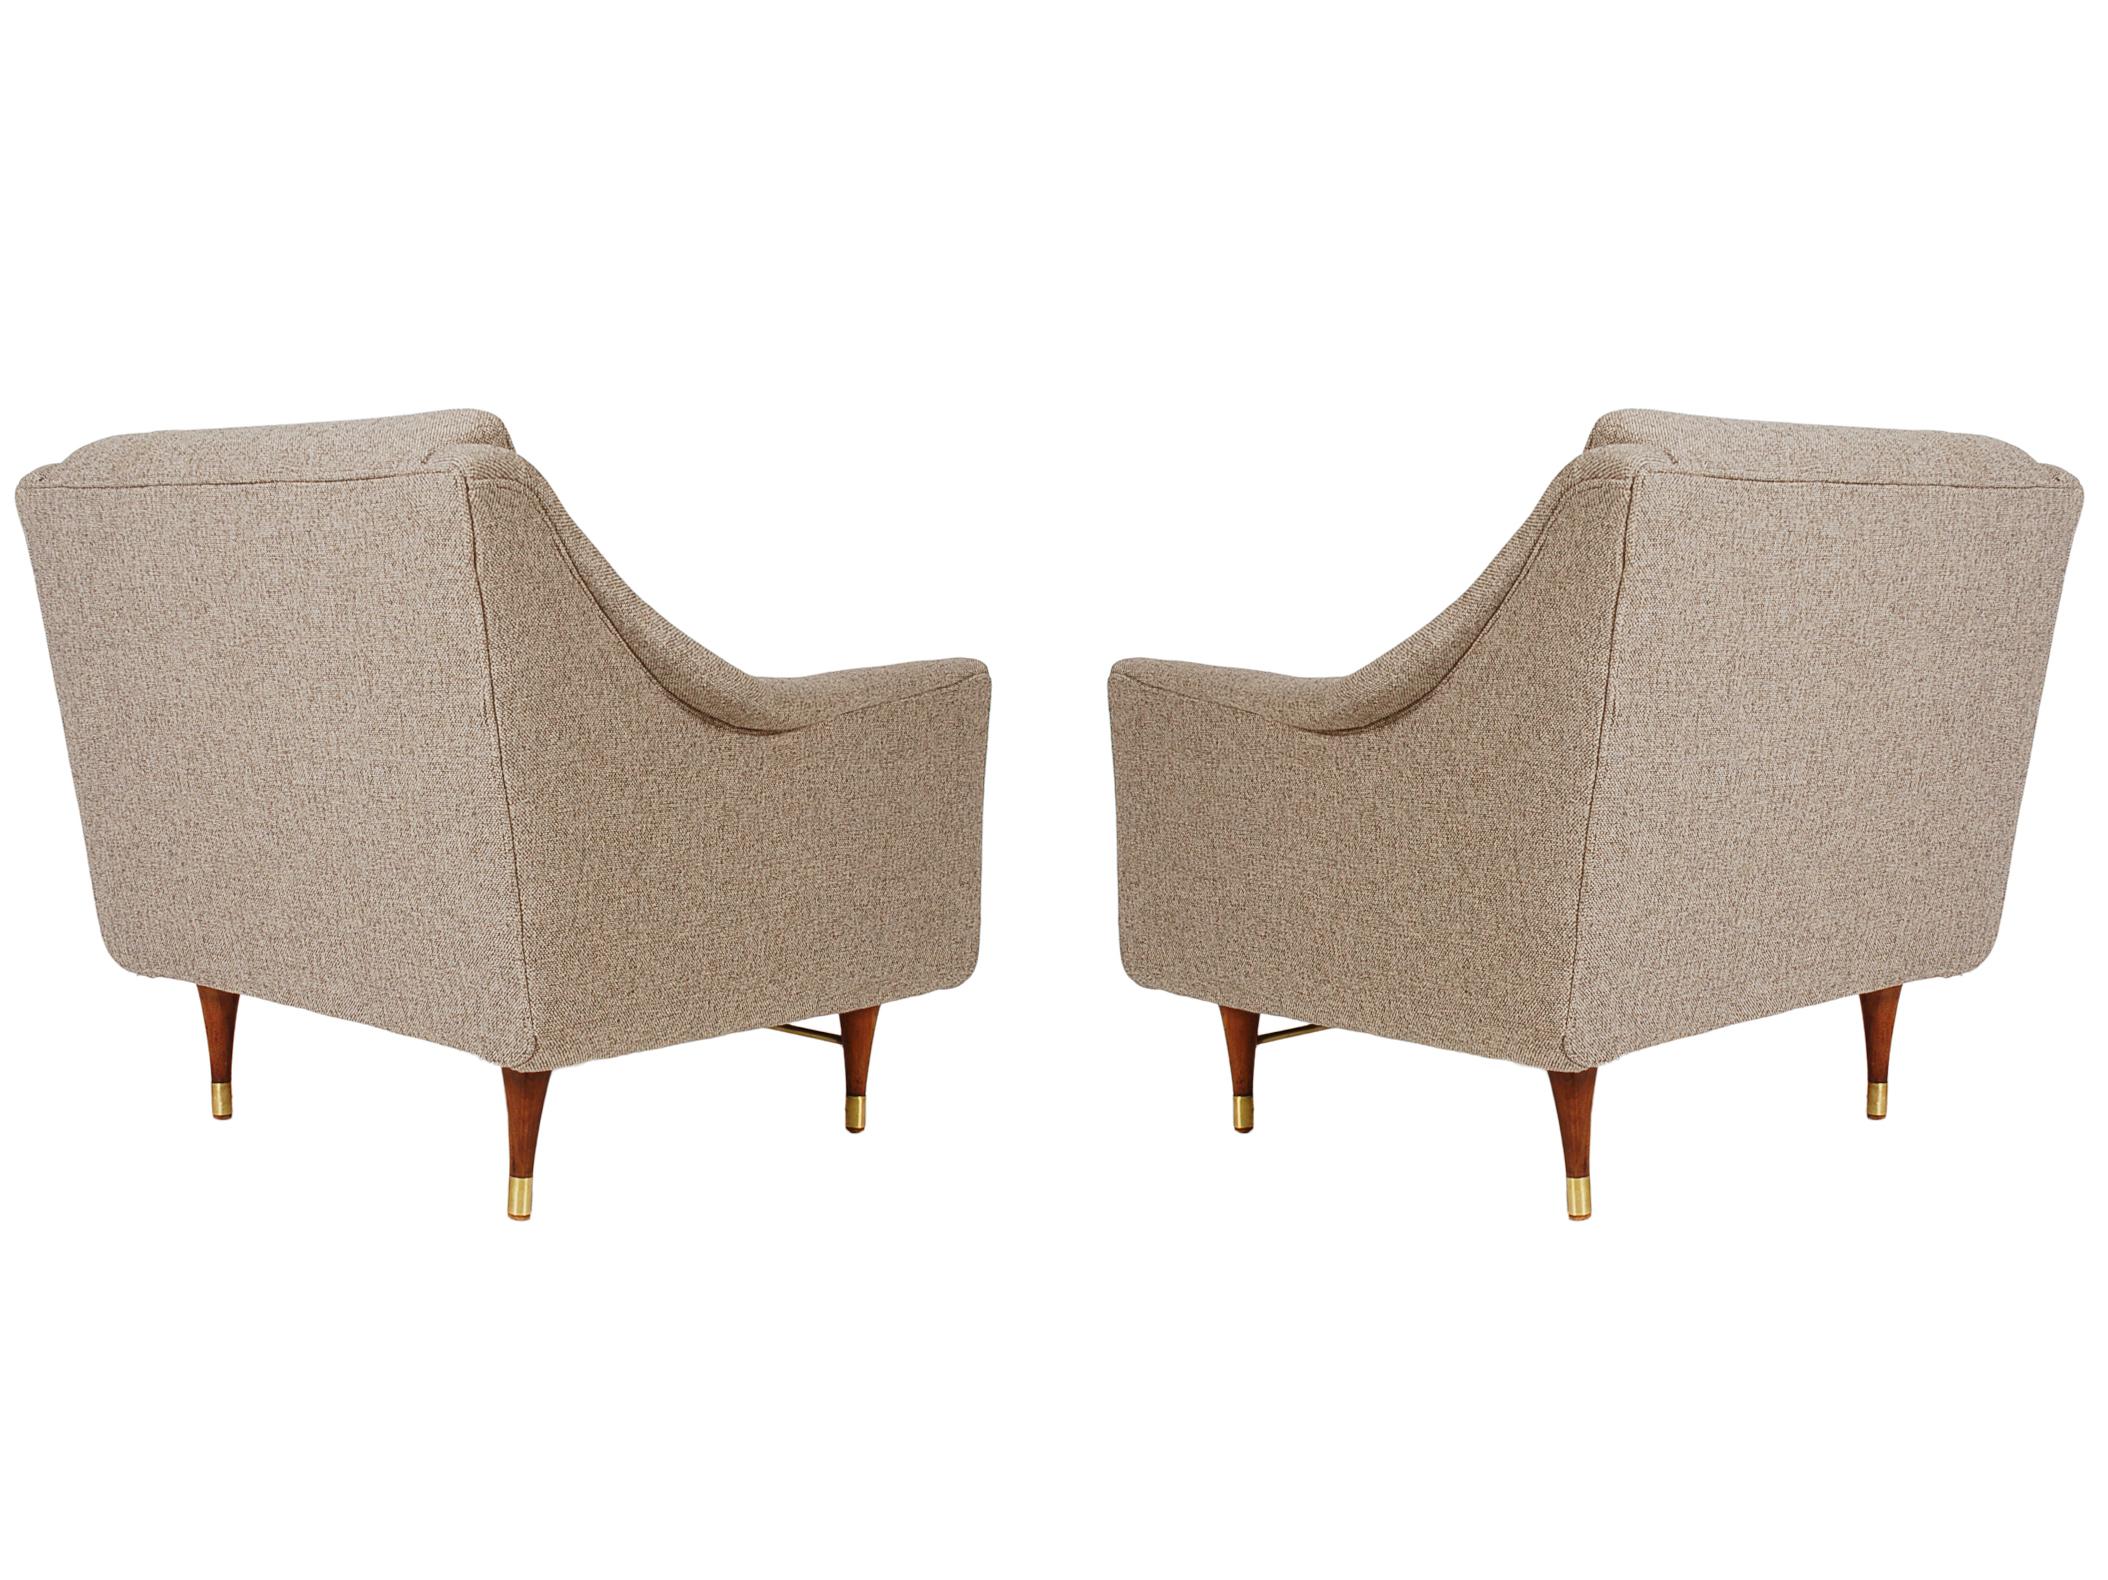 Mid-Century Modern Lounge or Club Chairs After Edward Wormley for Dunbar 6